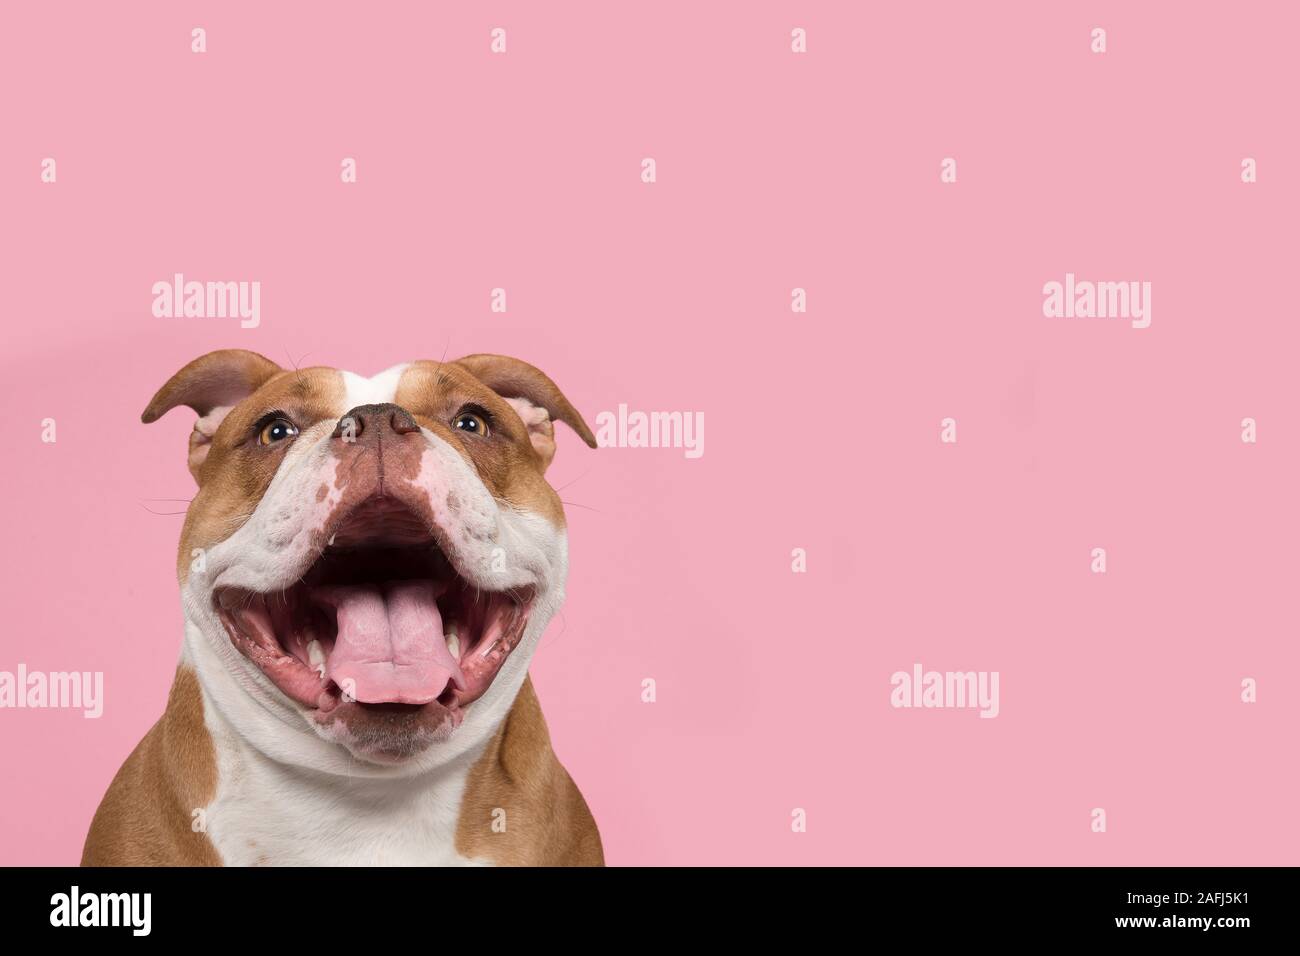 Funny portrait of an old english bulldog with a huge smile on the corner of the image on a pink background with copy space Stock Photo